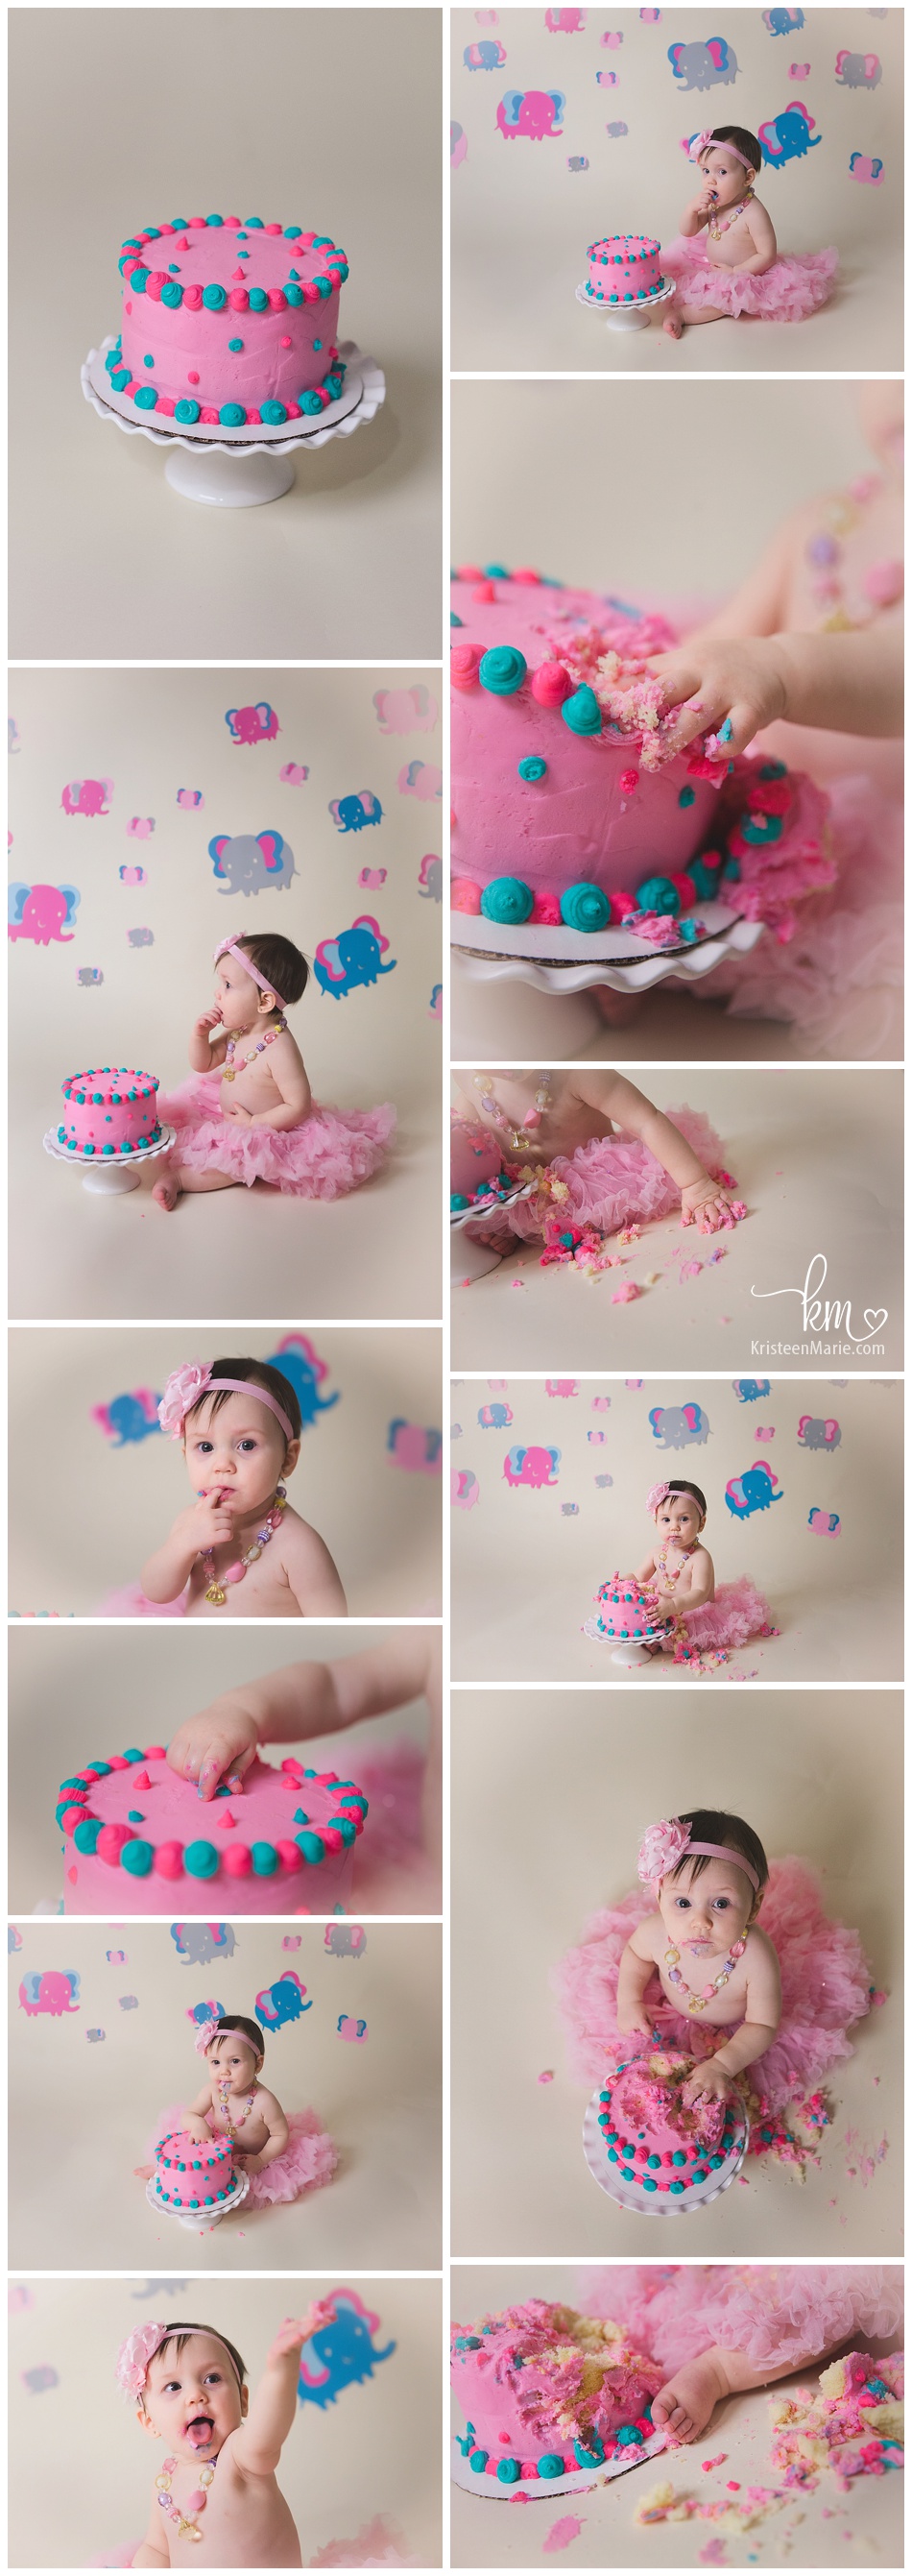 circus themed cake smash for little girl - pink, blue, grey